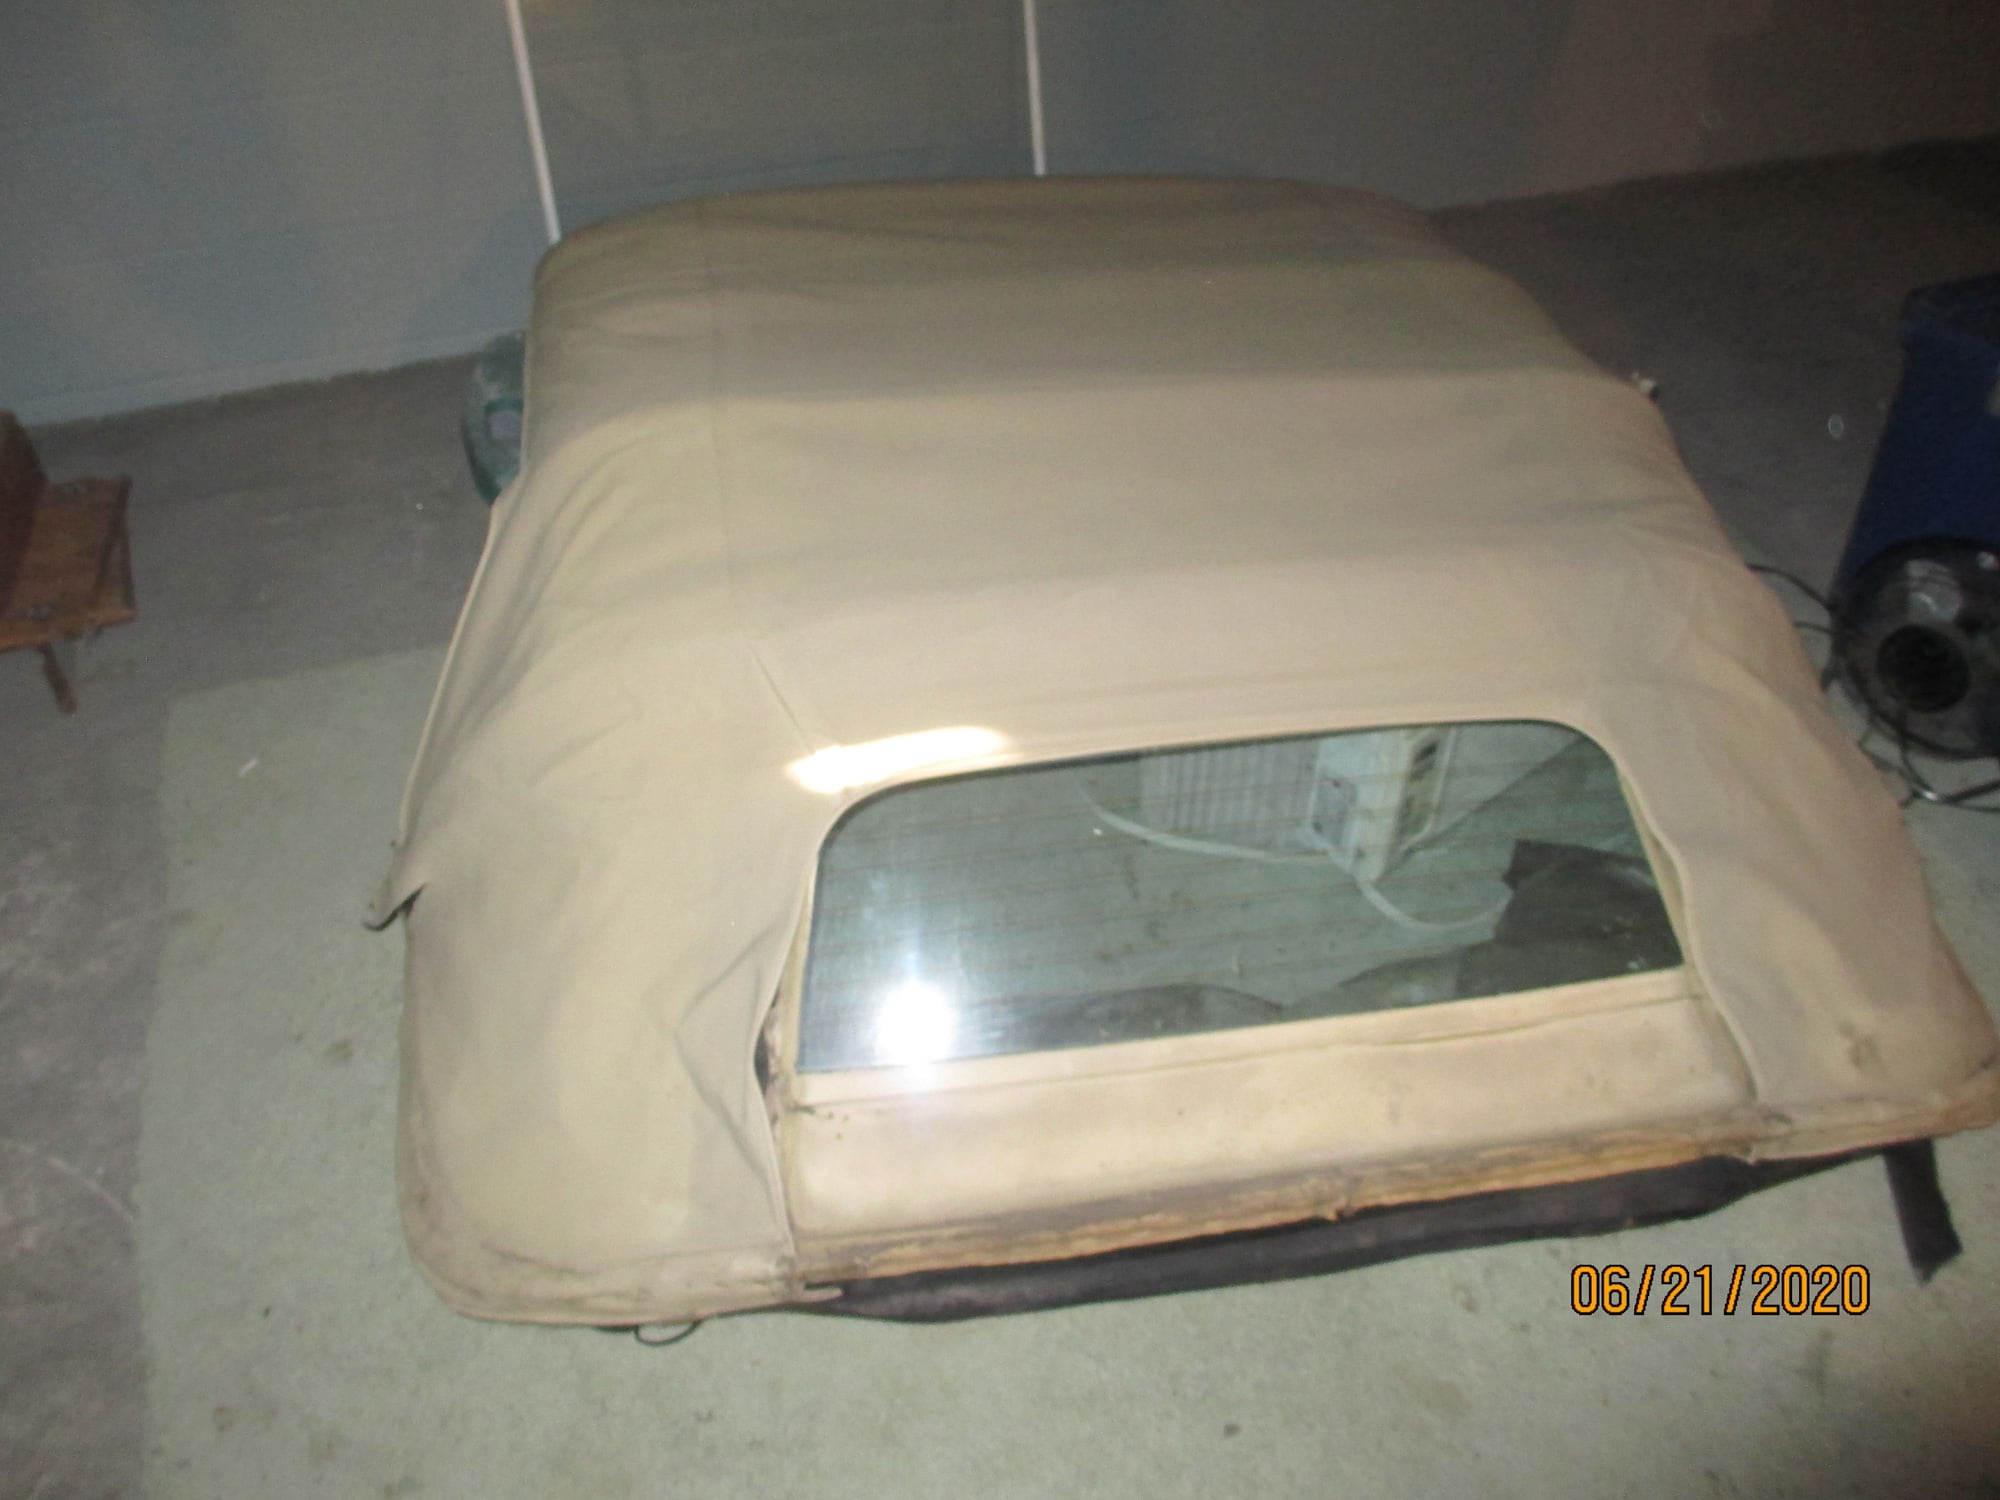 Exterior Body Parts - 1987 1988 Jaguar XJ S H & E Complete Convertible Top May Deliver along Route 80 $500 - Used - 0  All Models - Shamokin, PA 17866, United States